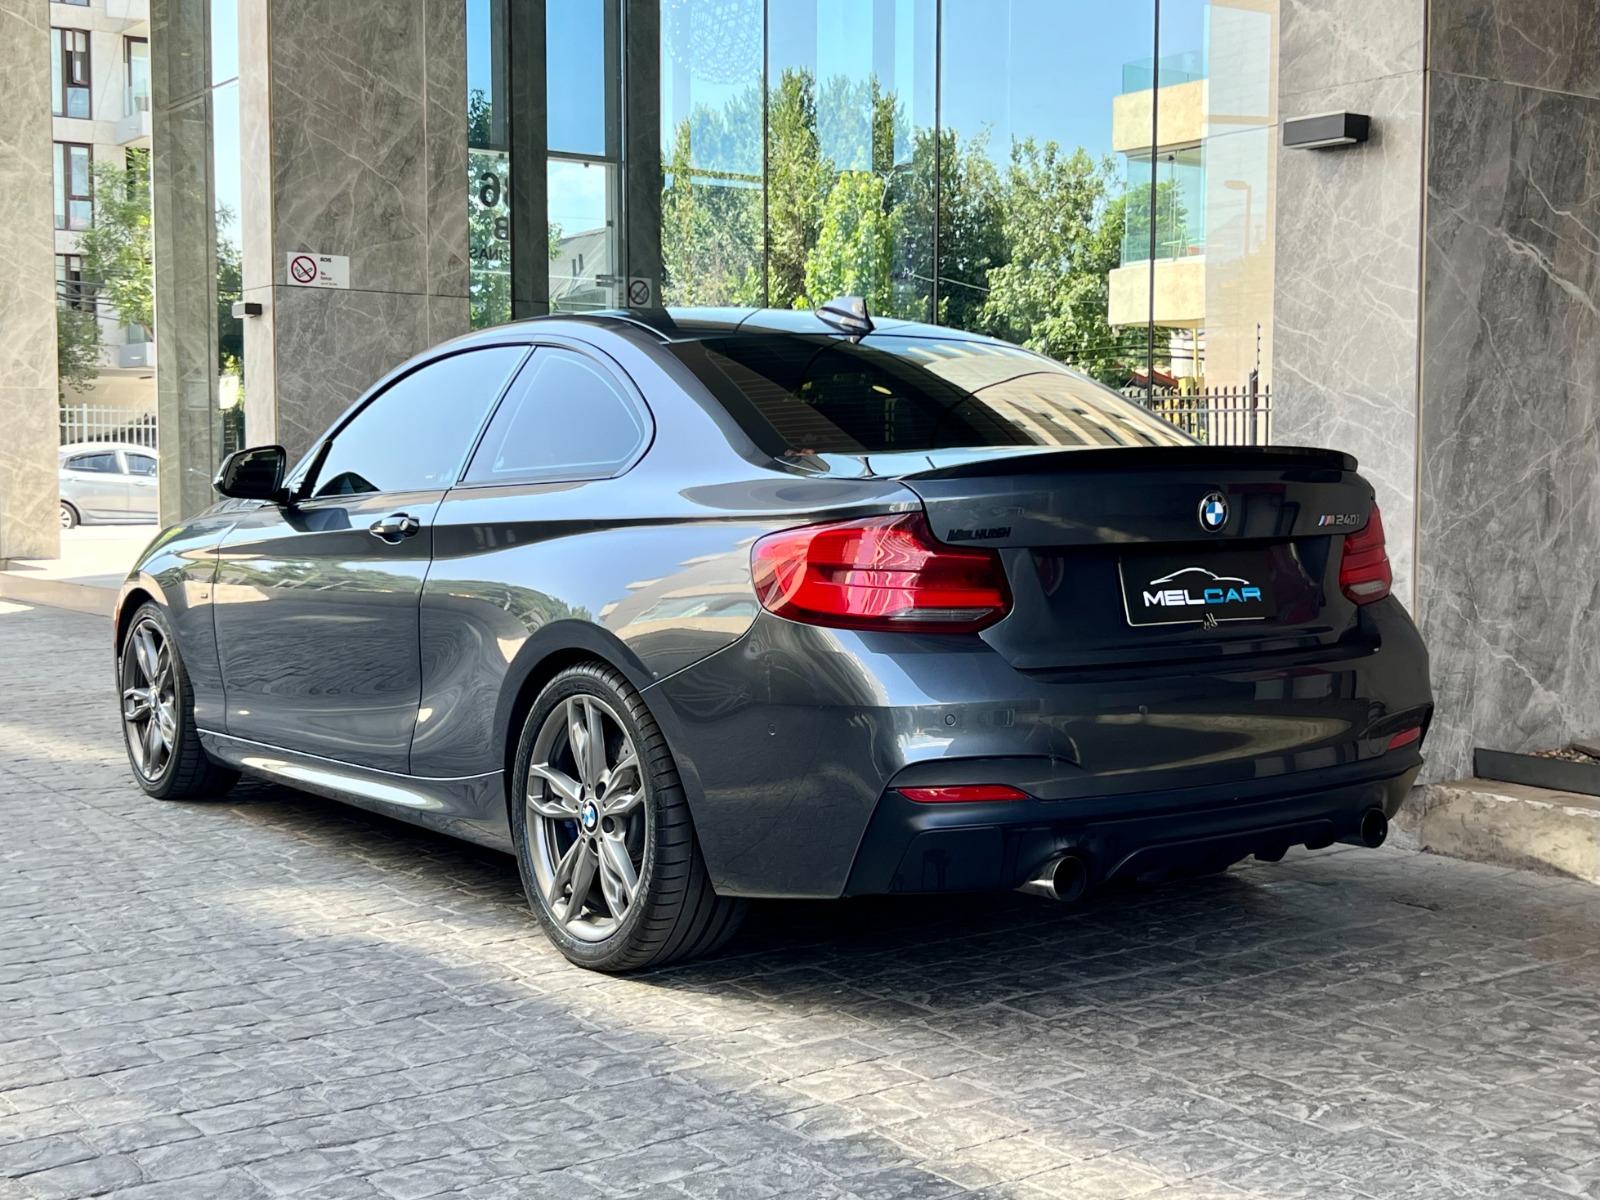 BMW M240 COUPE 2018 EQUIPO EXTRA - FULL MOTOR